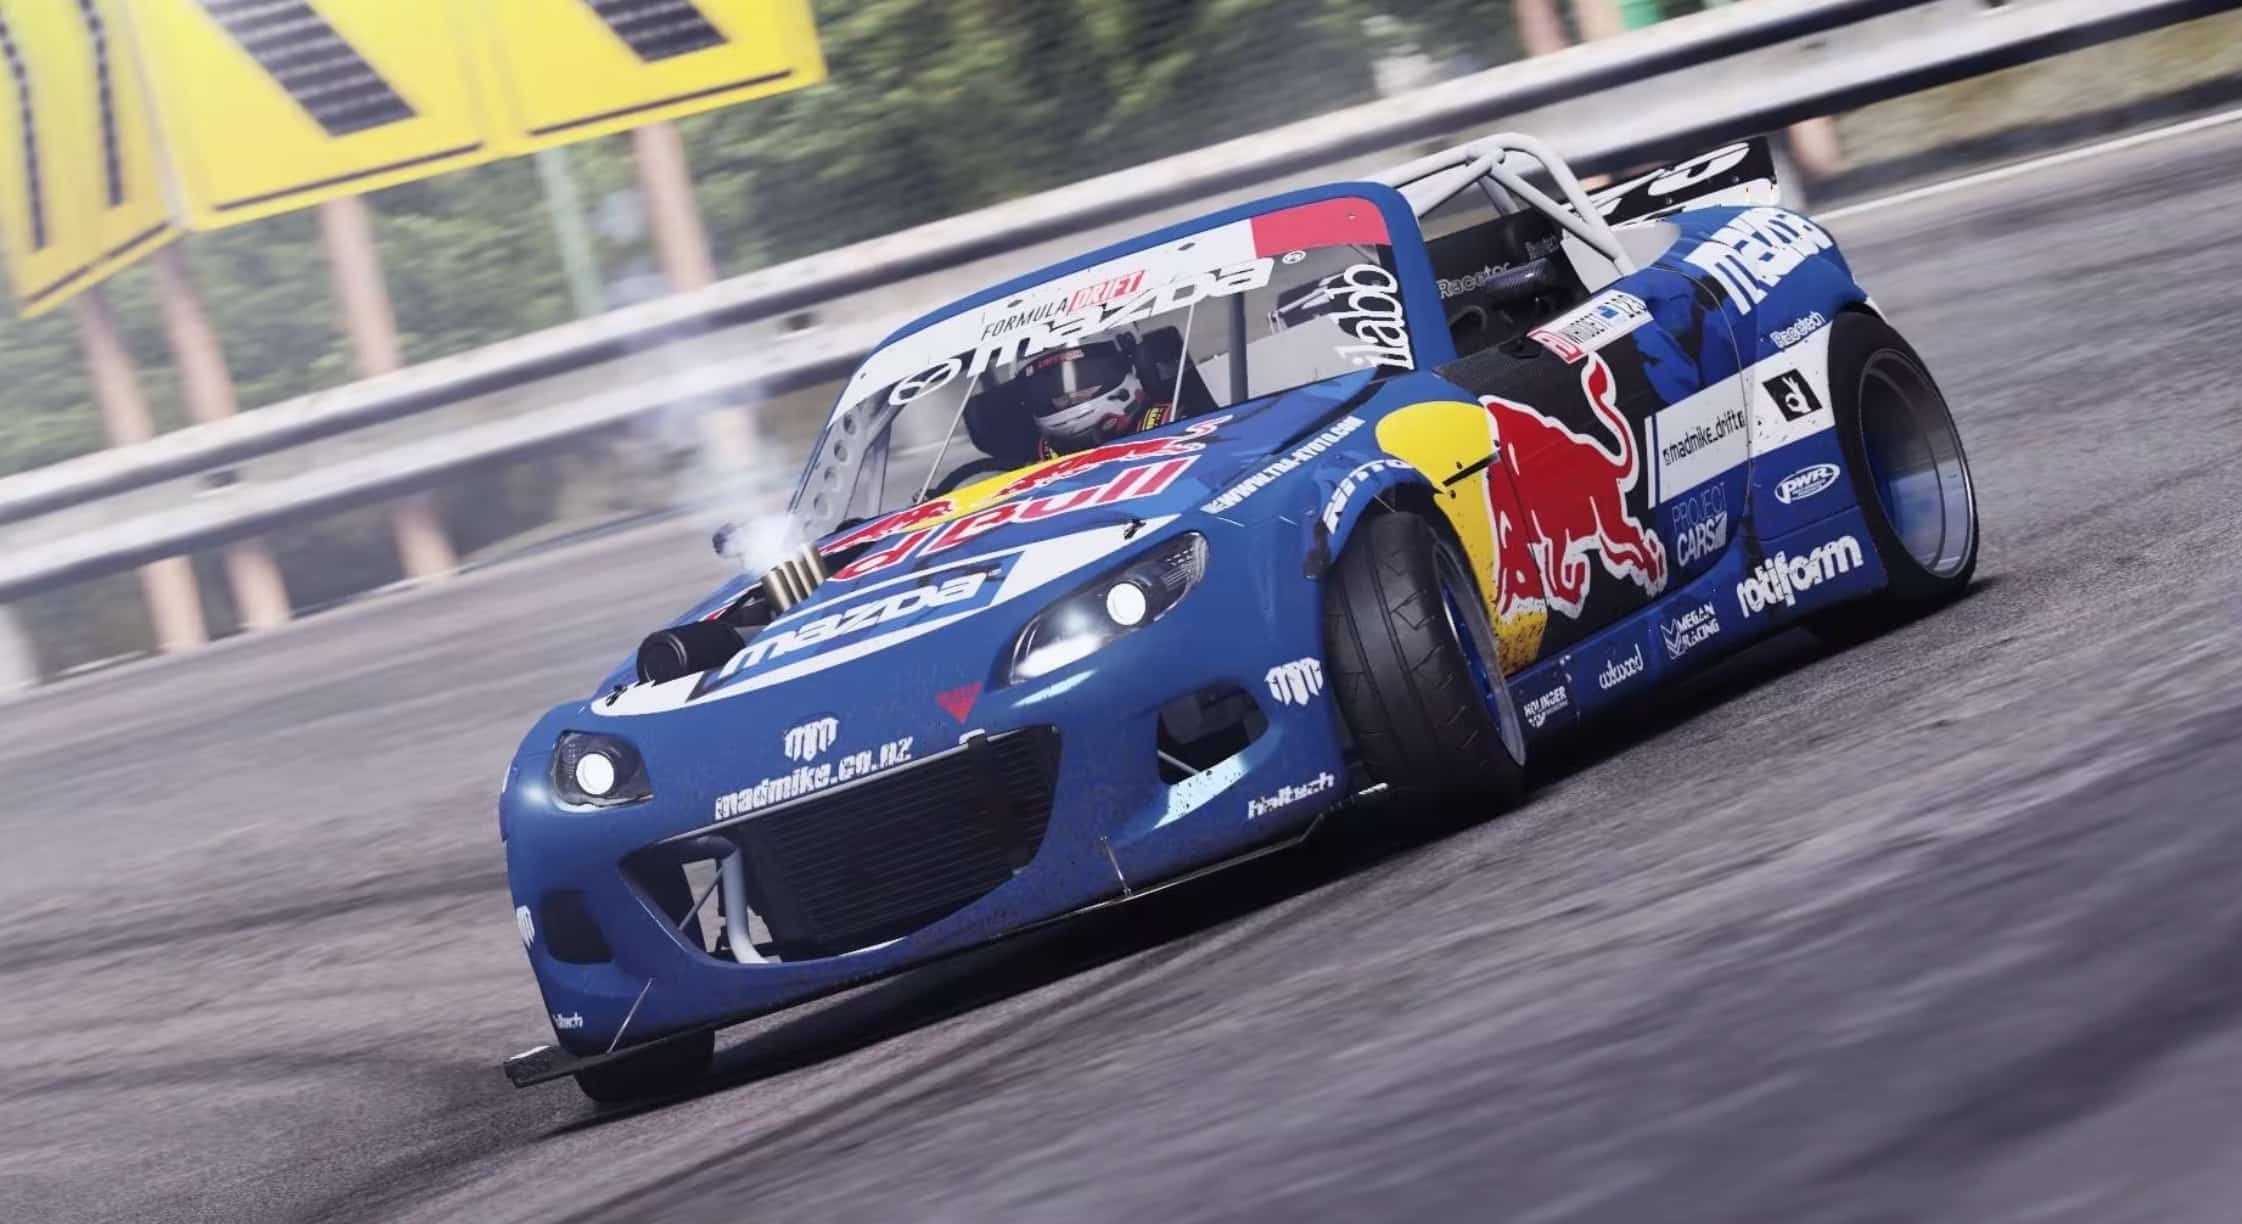 Project Cars 1&2 will be delisted due to expired licenses